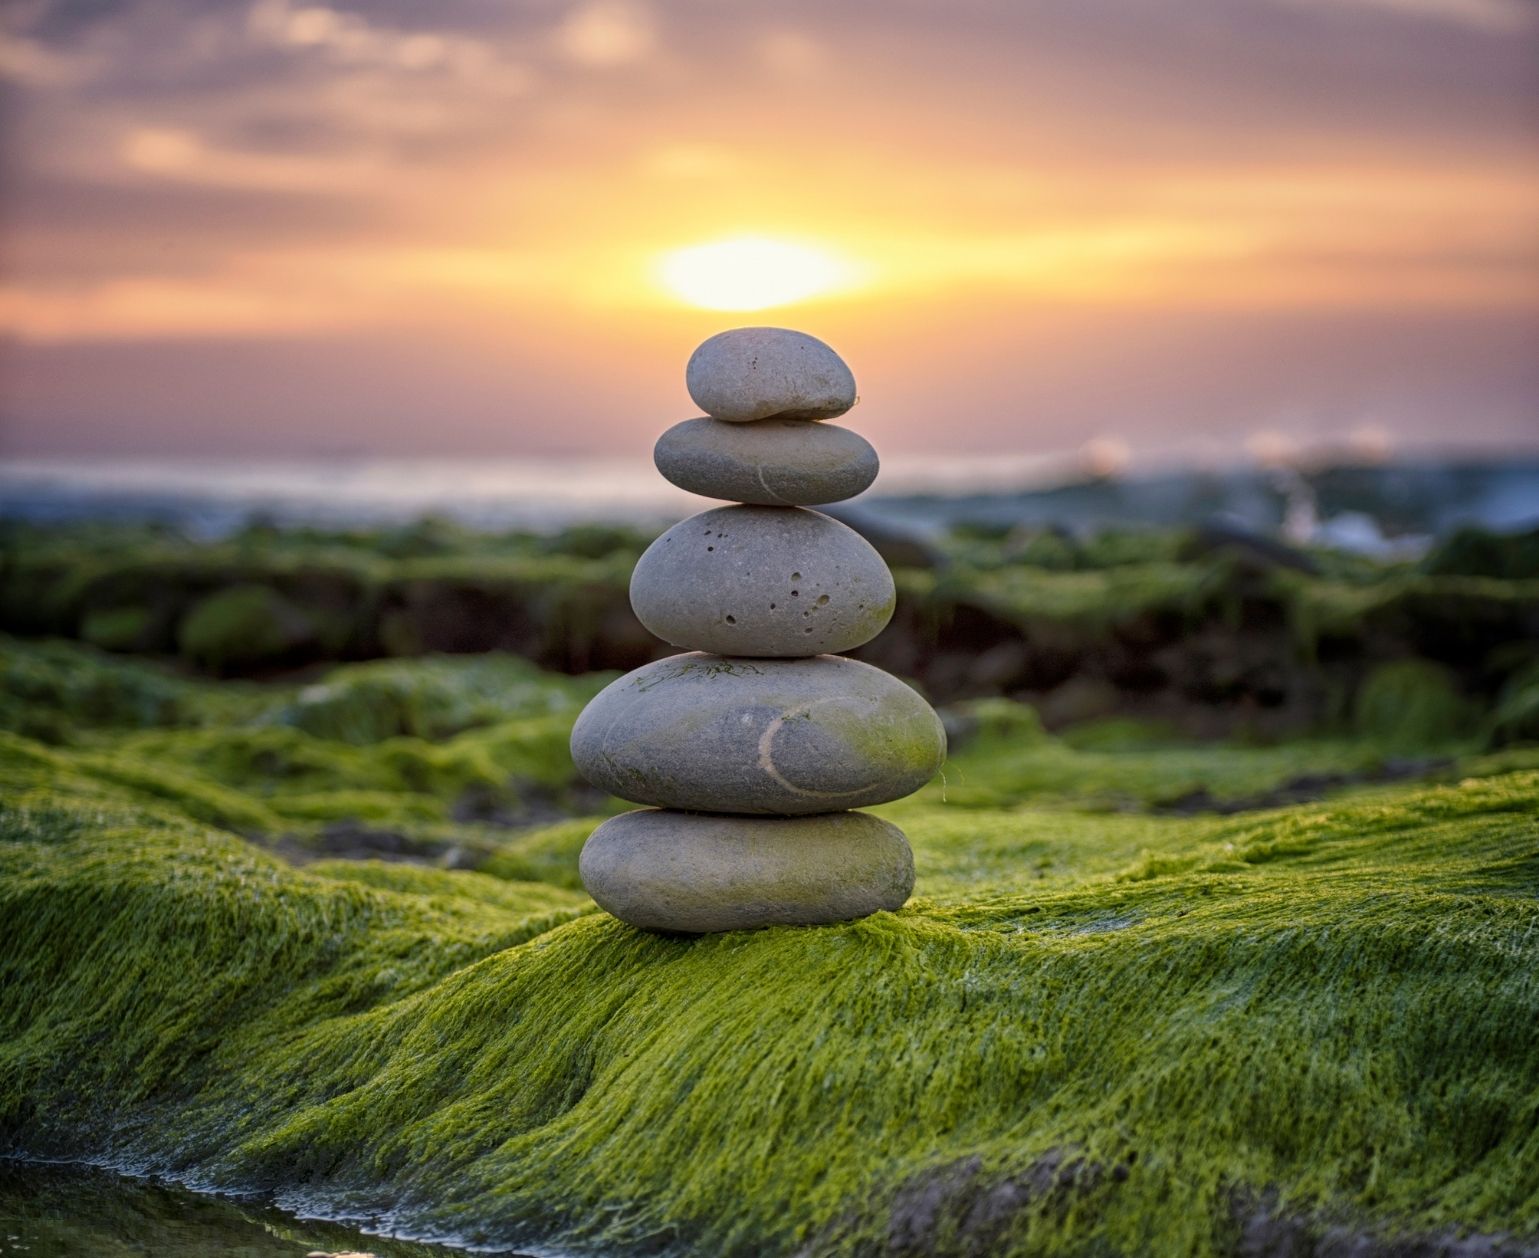 Balanced rocks - Savvy Business Support also offers balance for busy complimentary health practitioners, spiritual entrepreneurs and business owner by providing common sense business solutions